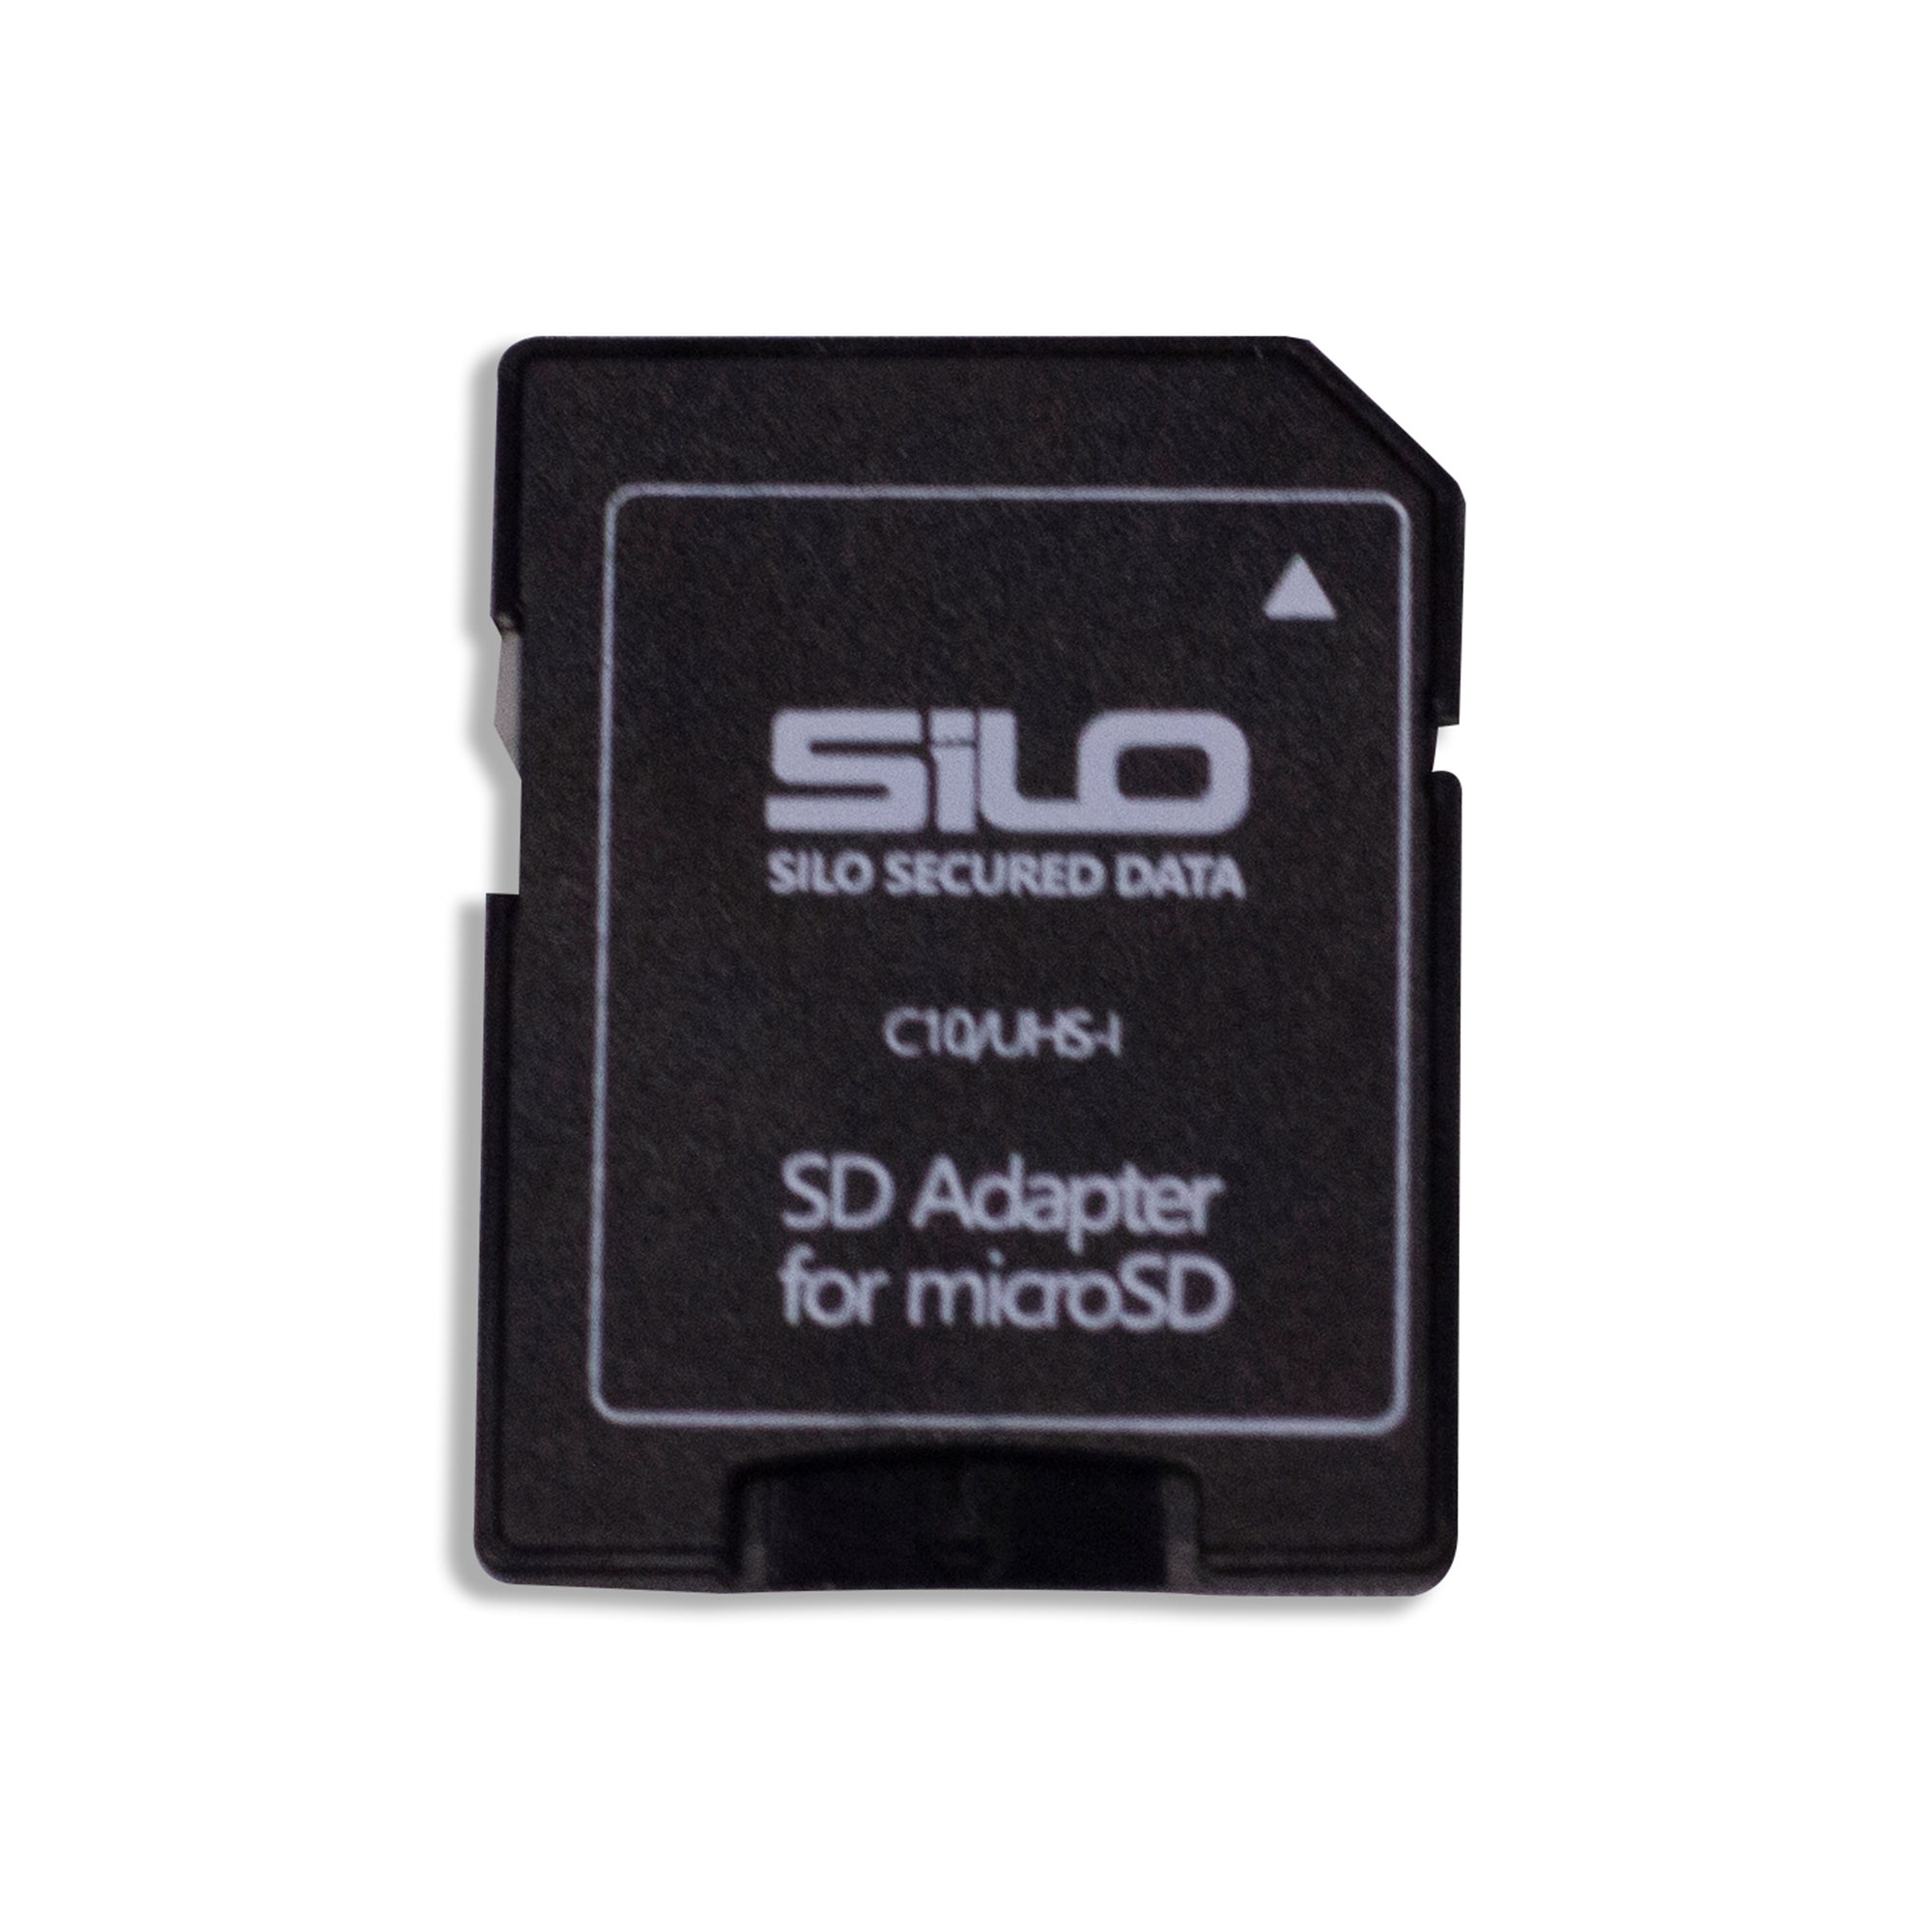 Silo 32GB SD Card - Our Silo Cloud Sd Cards Are Designed To Extend Your Mobile Phone’s Internal Memory Capacity. Also, It Backs Up Files Through The Silo Cloud So That Your Files Are Never Lost.